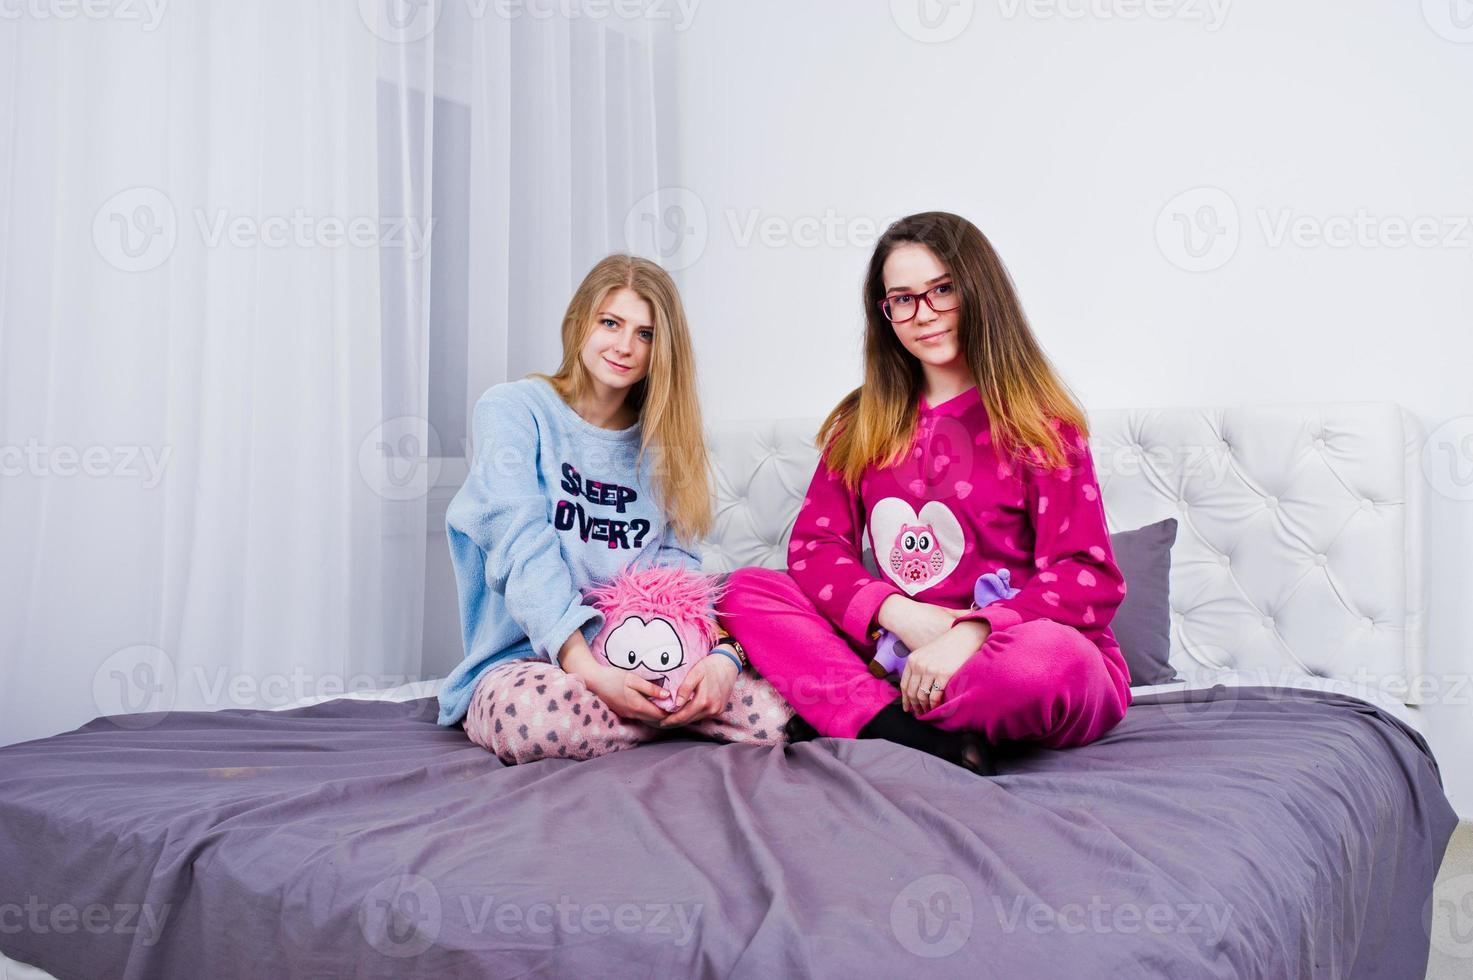 Two friends girls in pajamas having fun on bed at room. photo